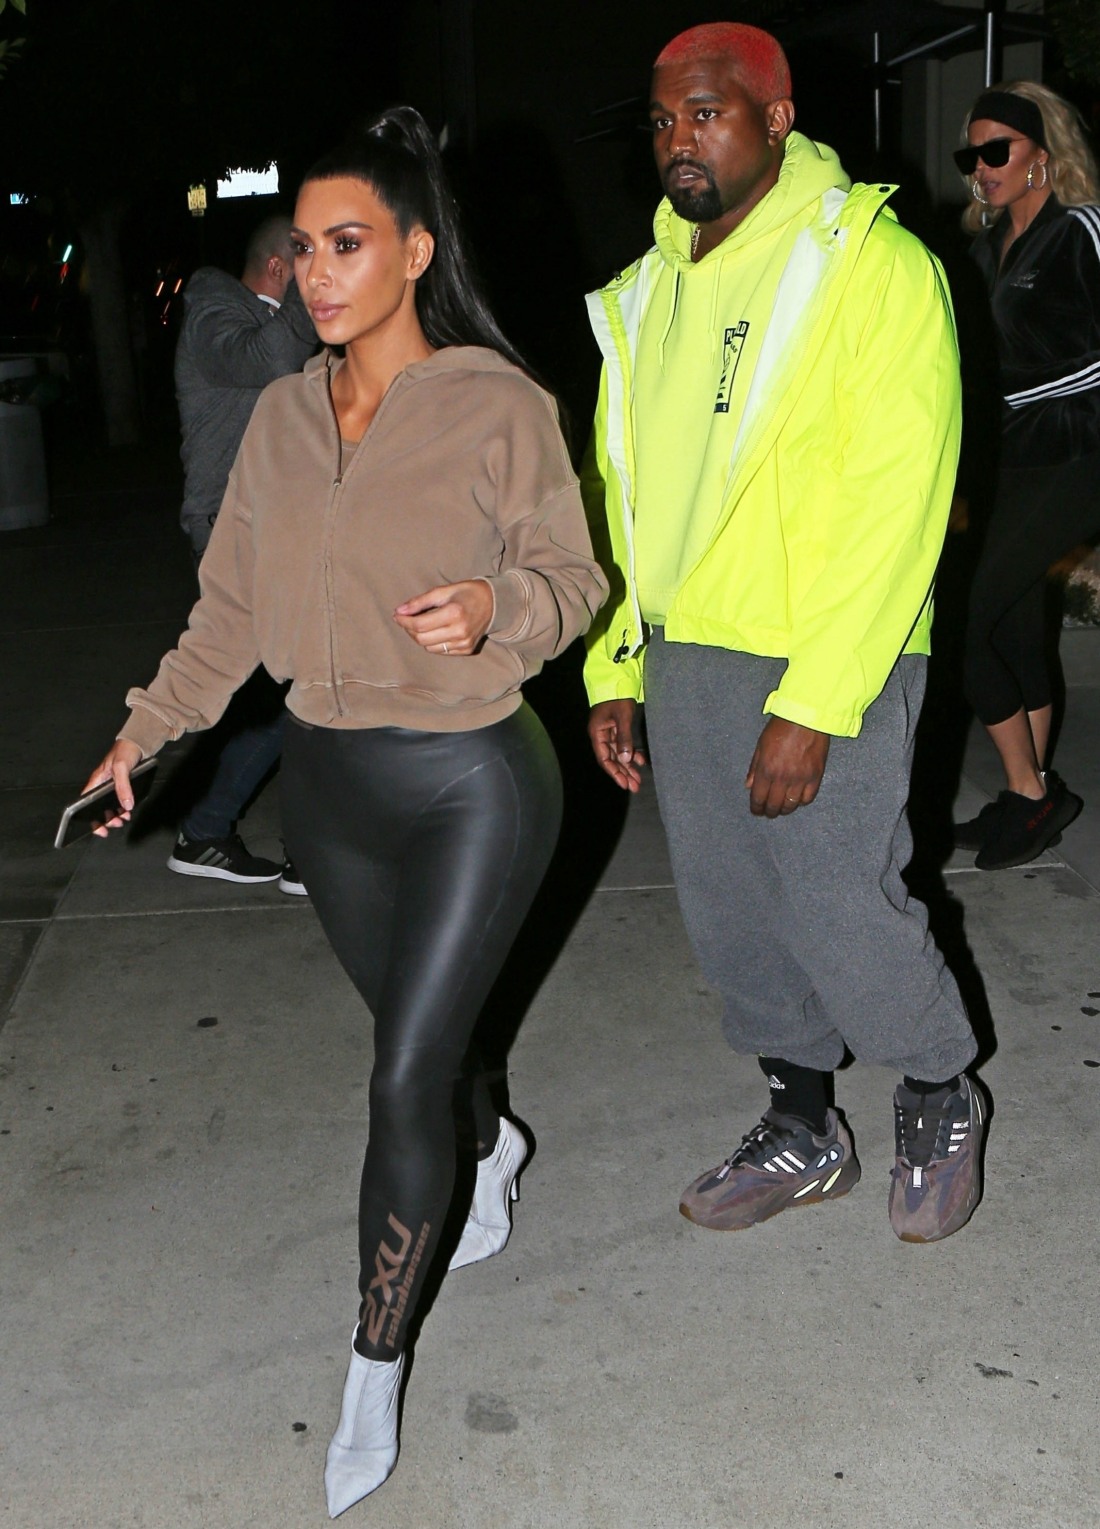 Kim Kardashian and Kanye West have dinner at with Khloe during LA wildfires